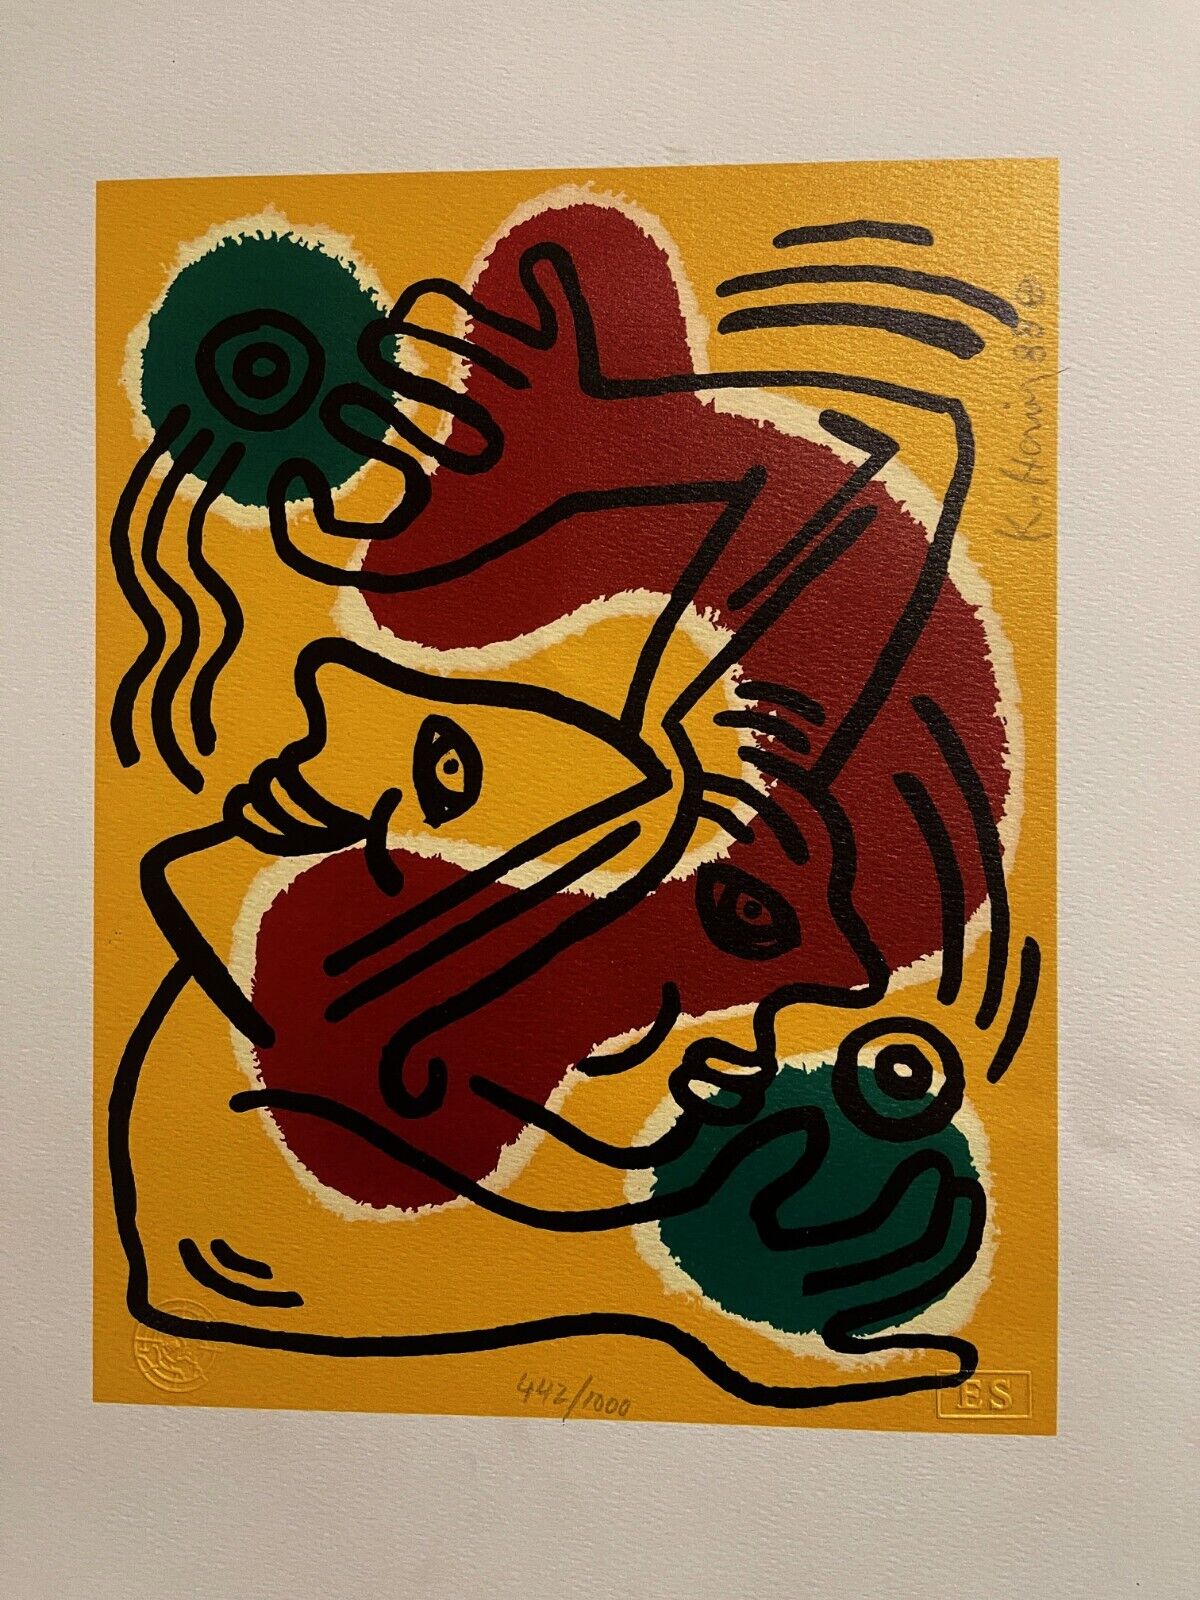 ORIGINAL KEITH HARING INTERNATIONAL YOUTH YEAR COLORED LITHOGRAPH SIGNED COA